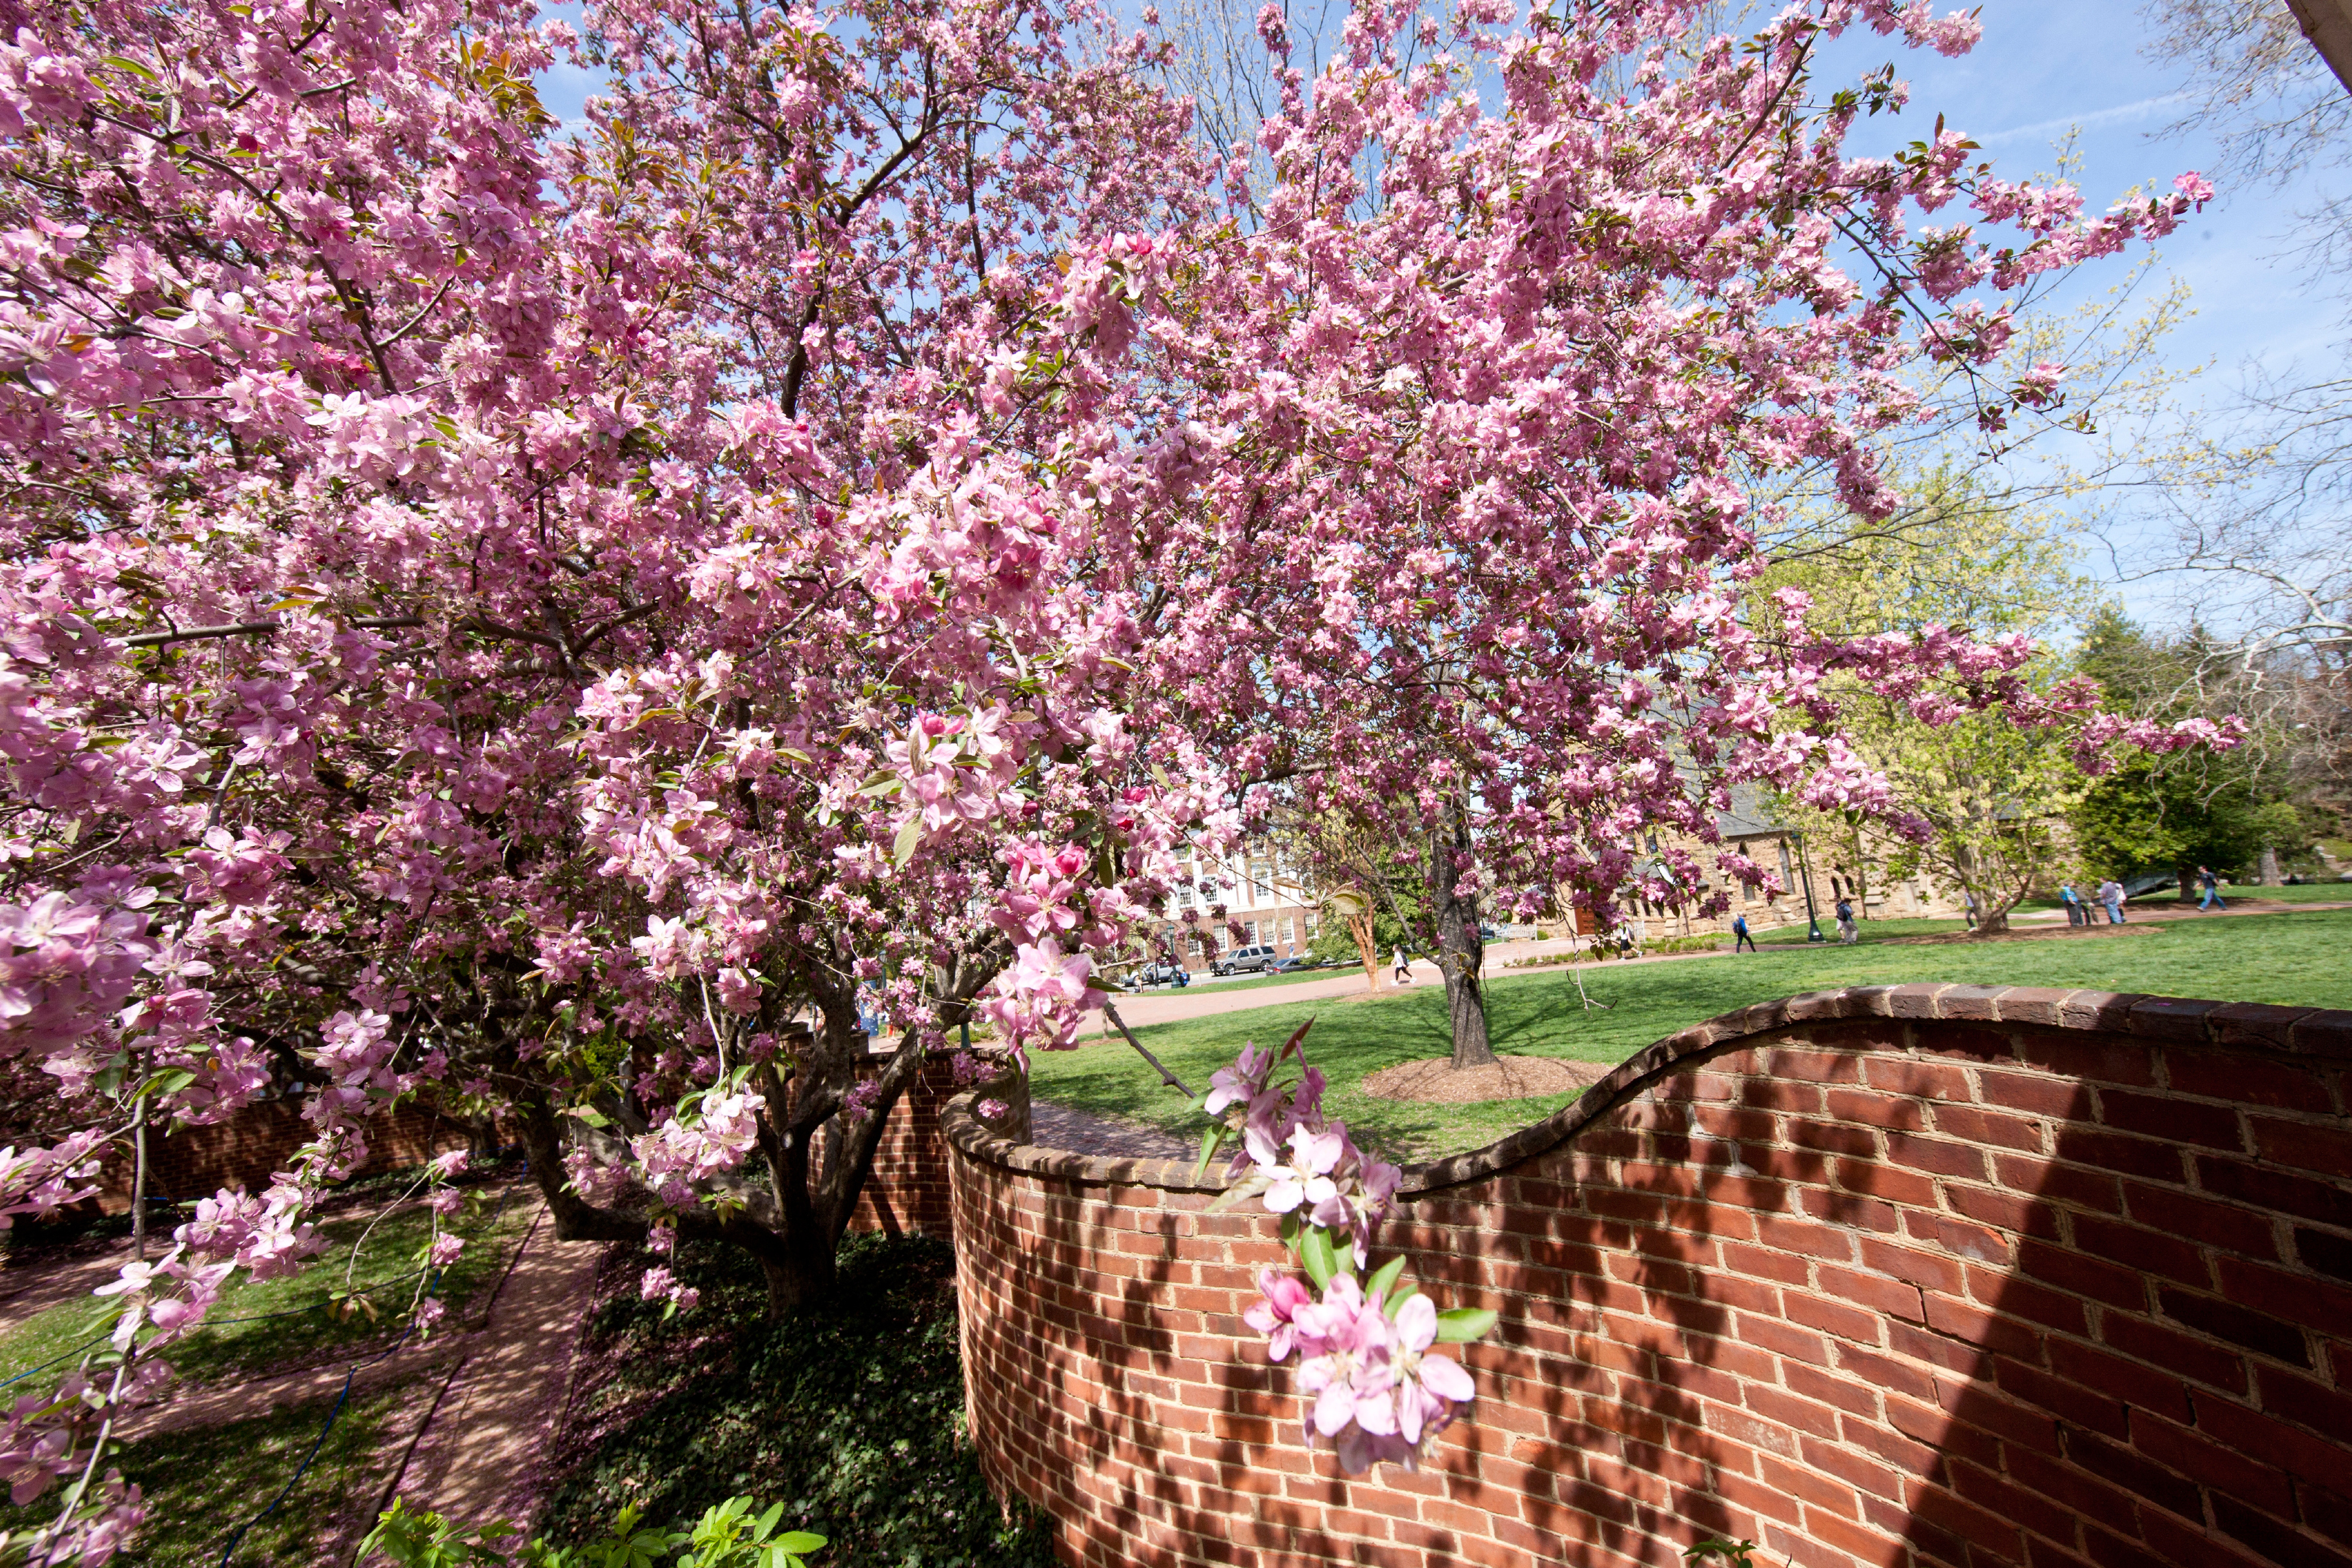 Pink blooming tree along the serpentine wall